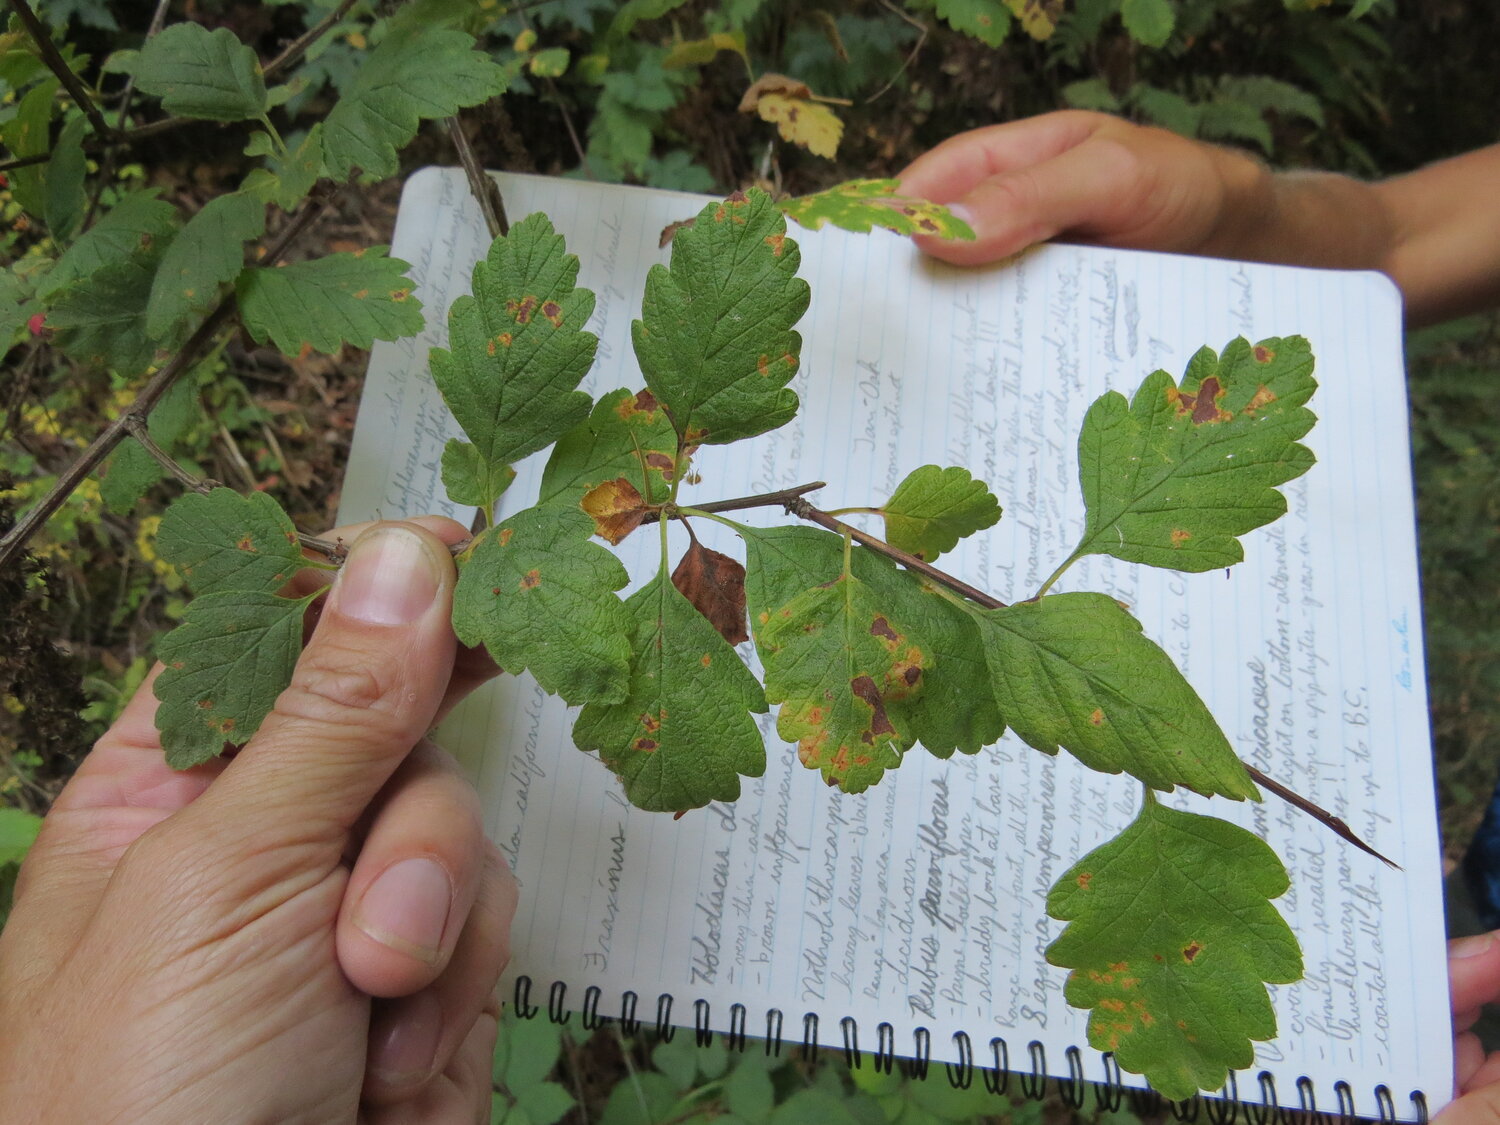 hands holding leaves and notebook